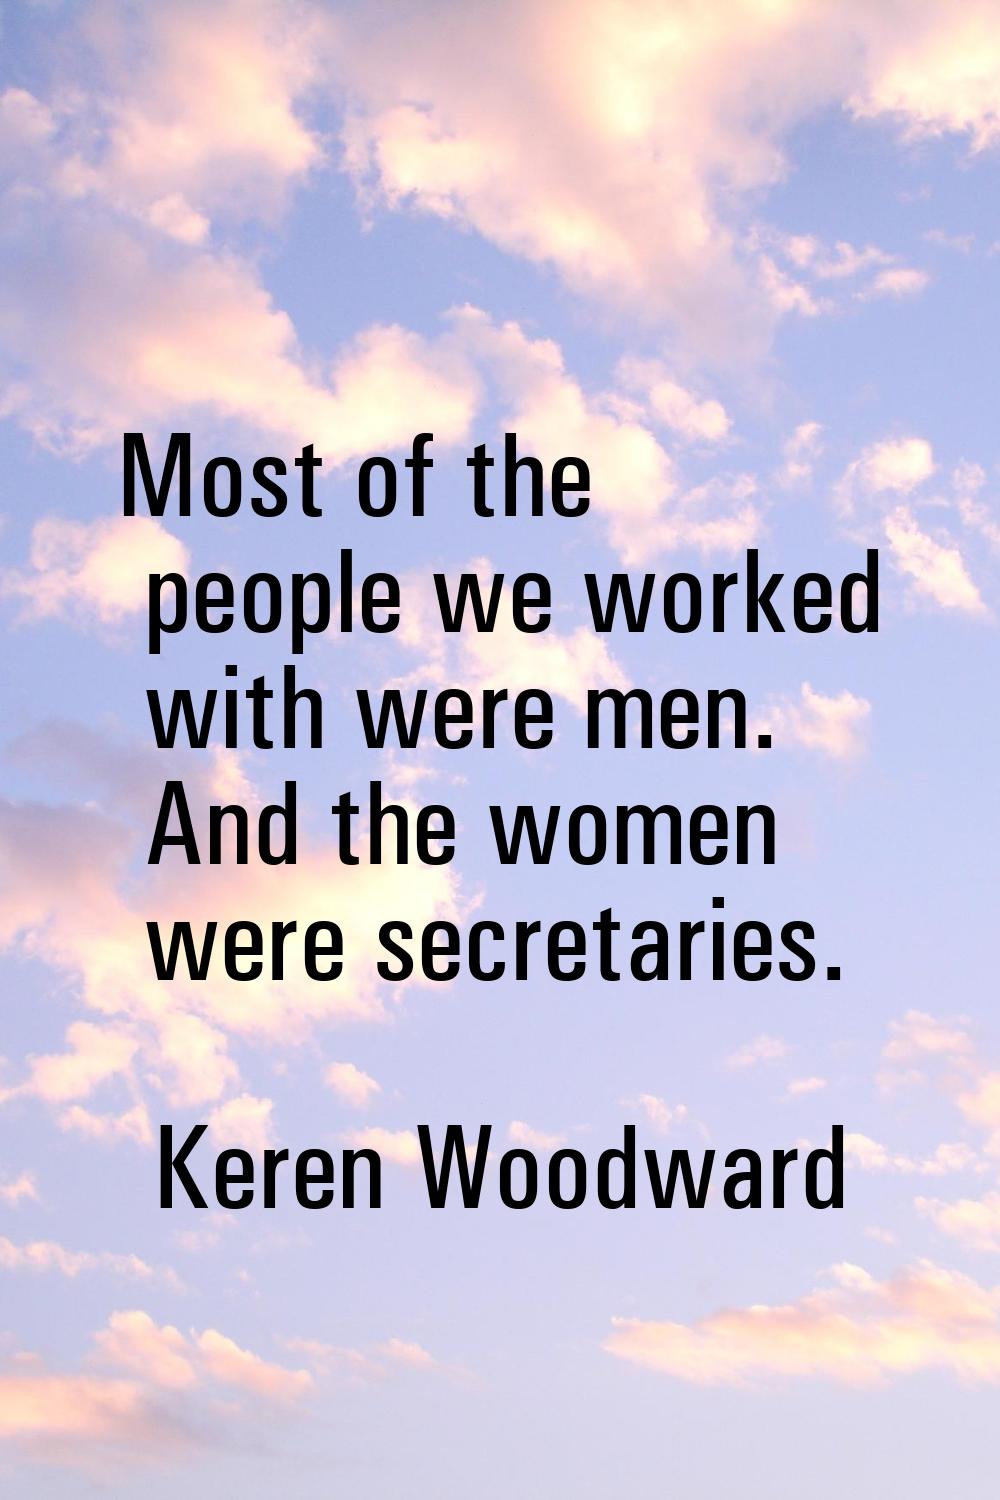 Most of the people we worked with were men. And the women were secretaries.